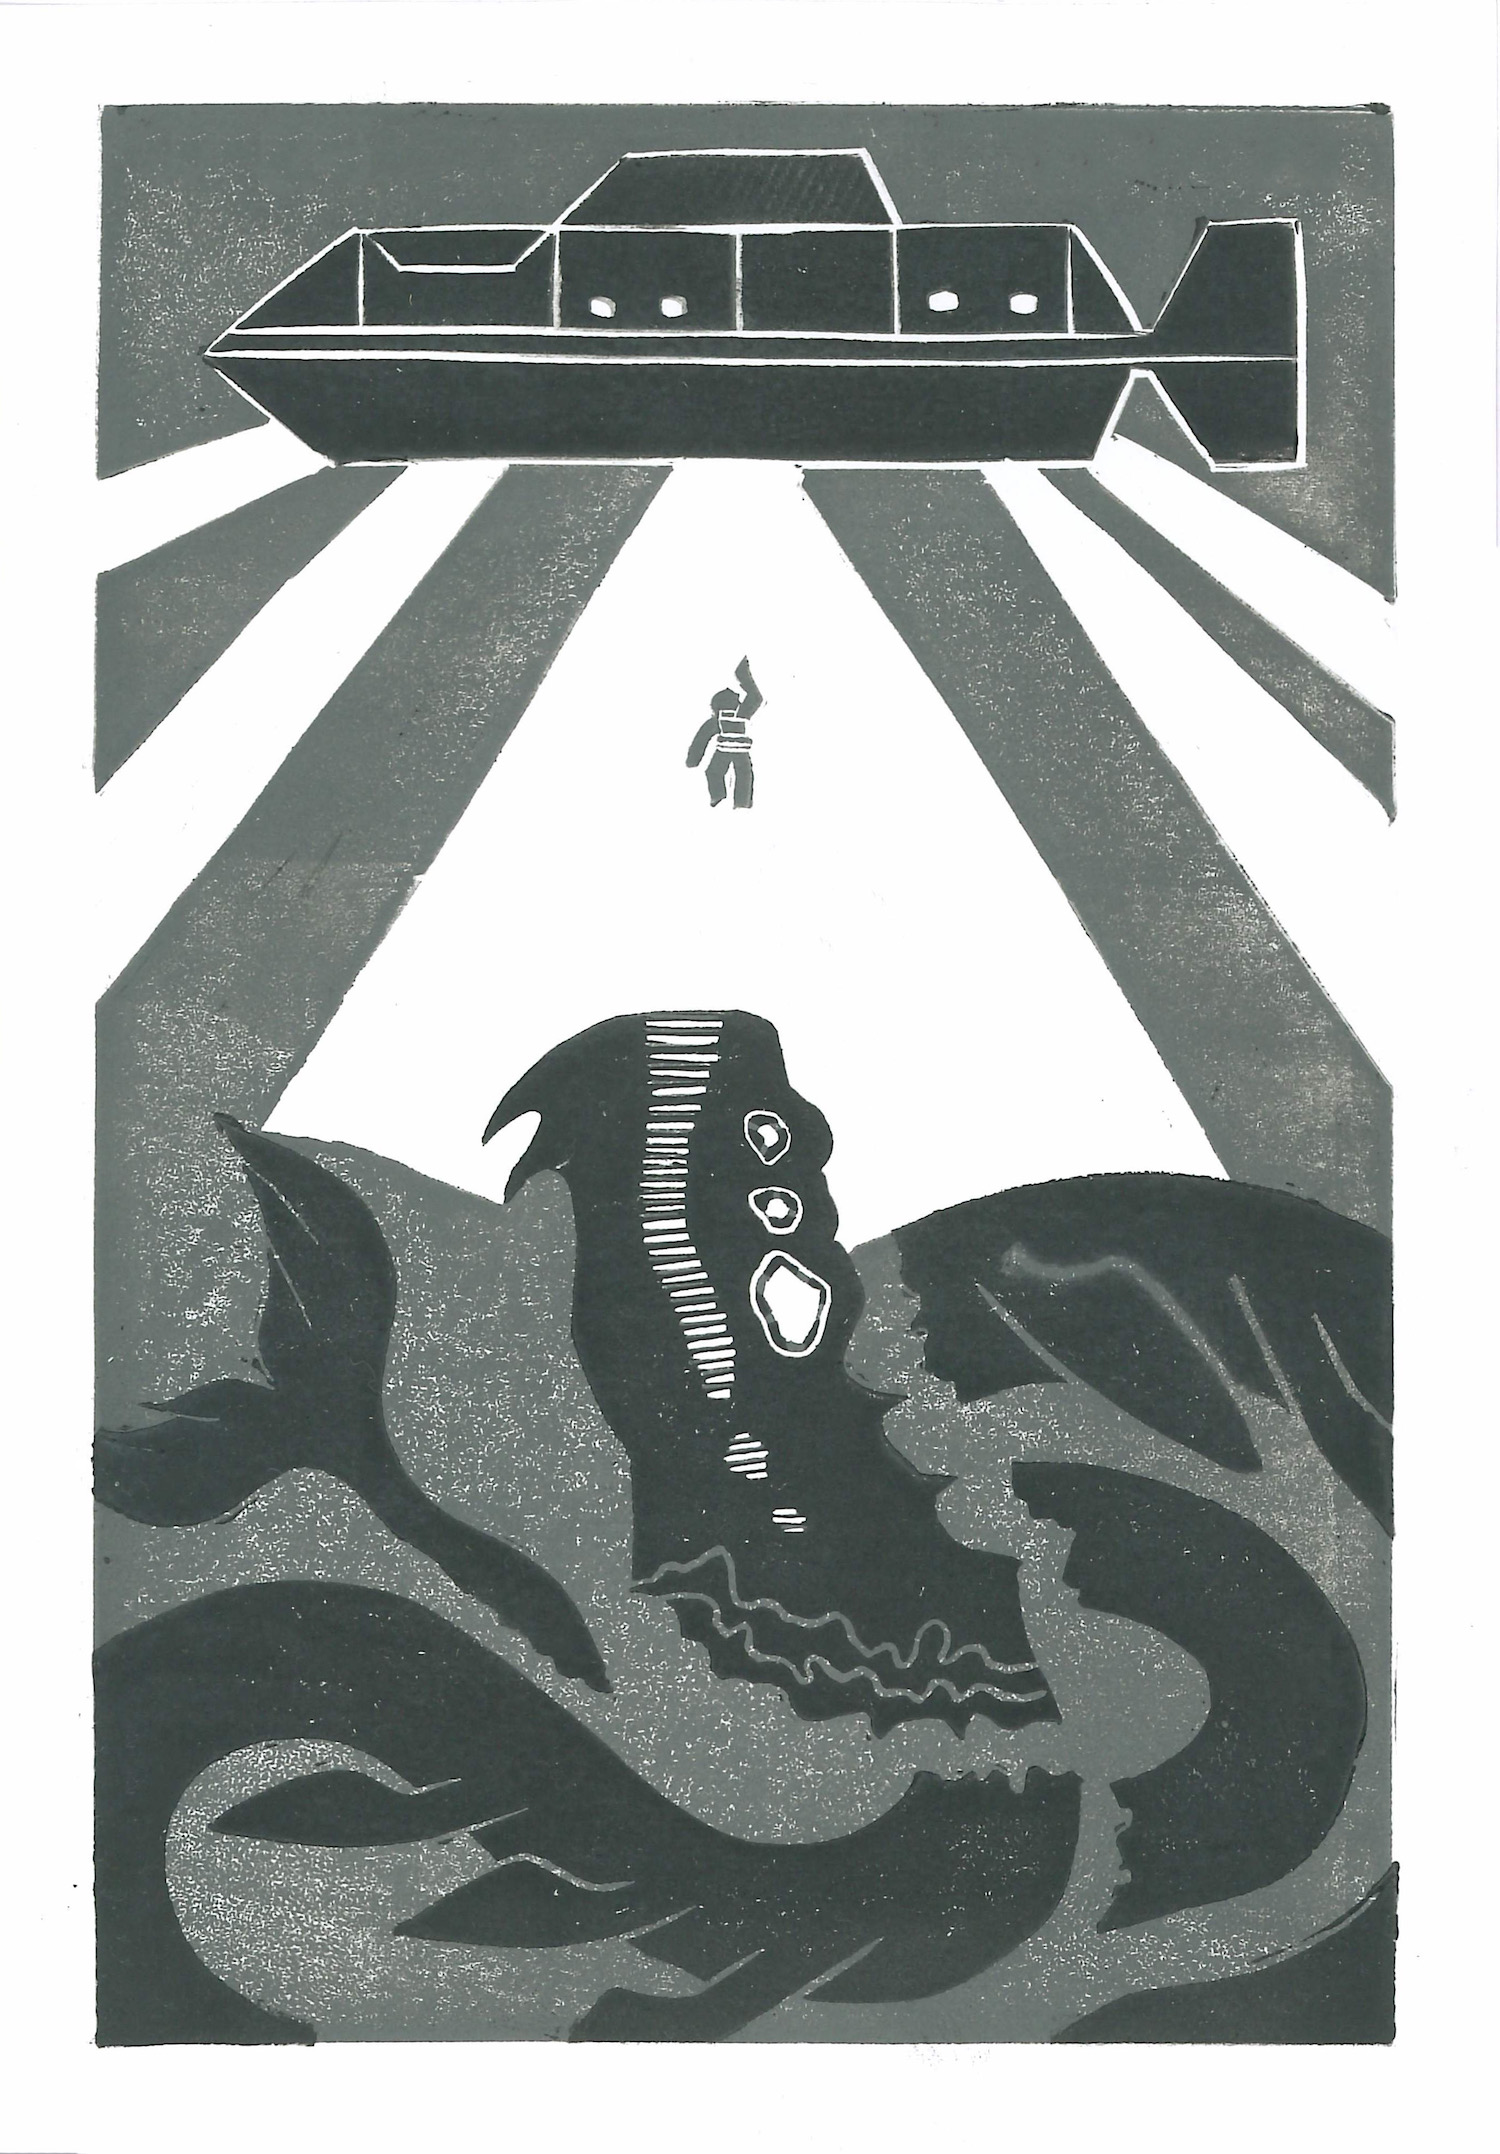 Print of submarine with searchlights illuminating diver below and Jabberwocky as sea monster